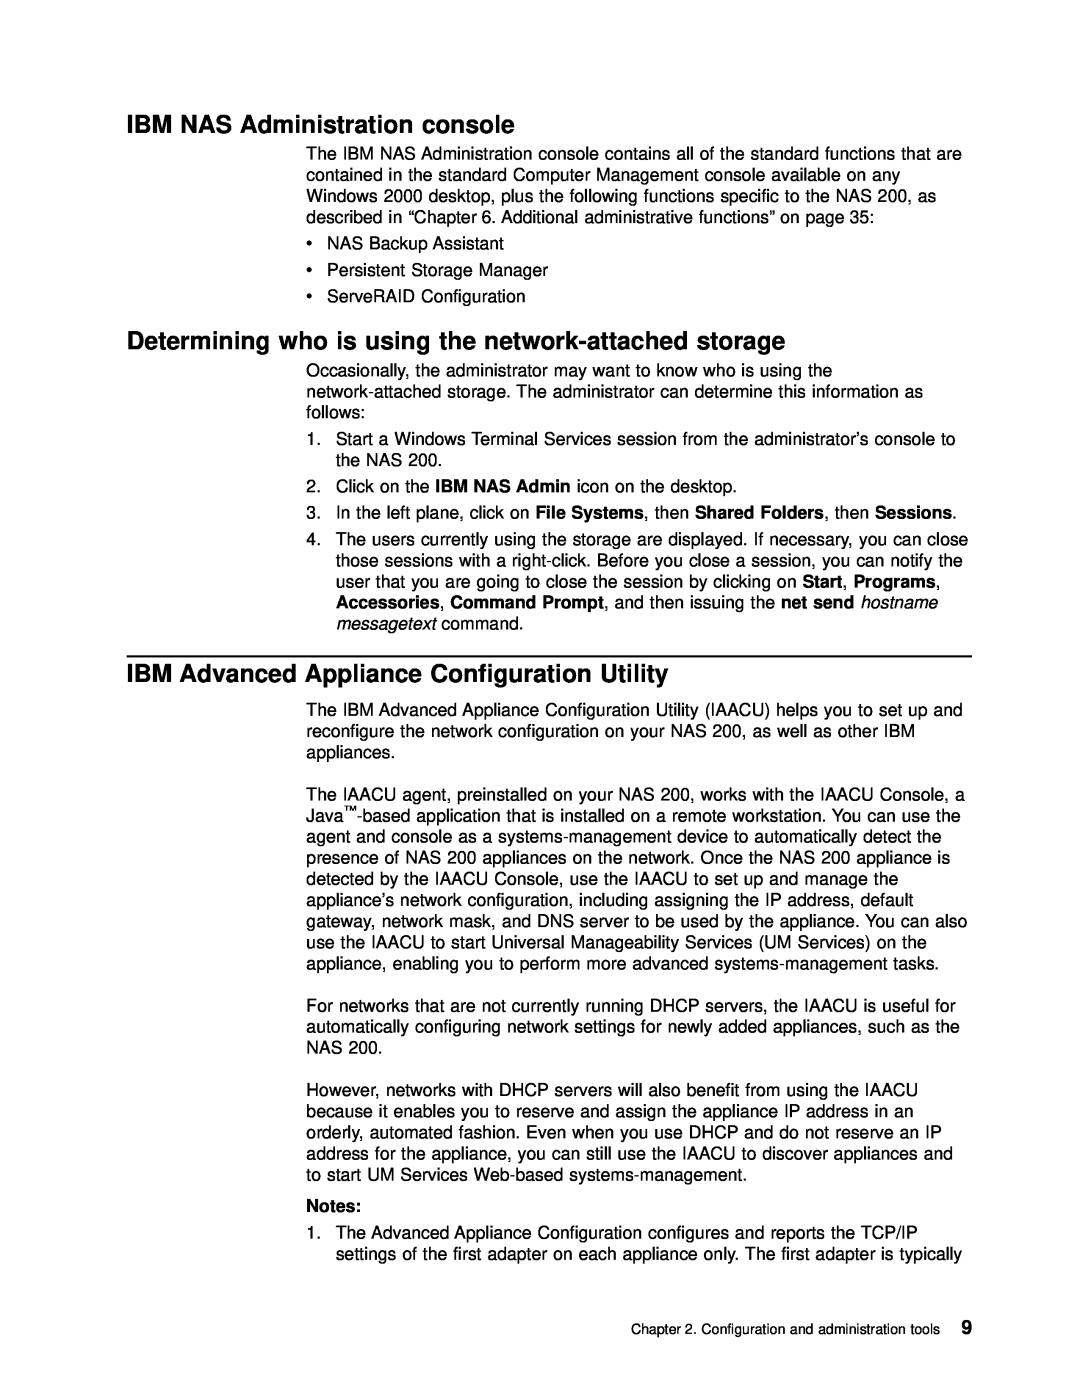 IBM 201 manual IBM NAS Administration console, Determining who is using the network-attached storage 